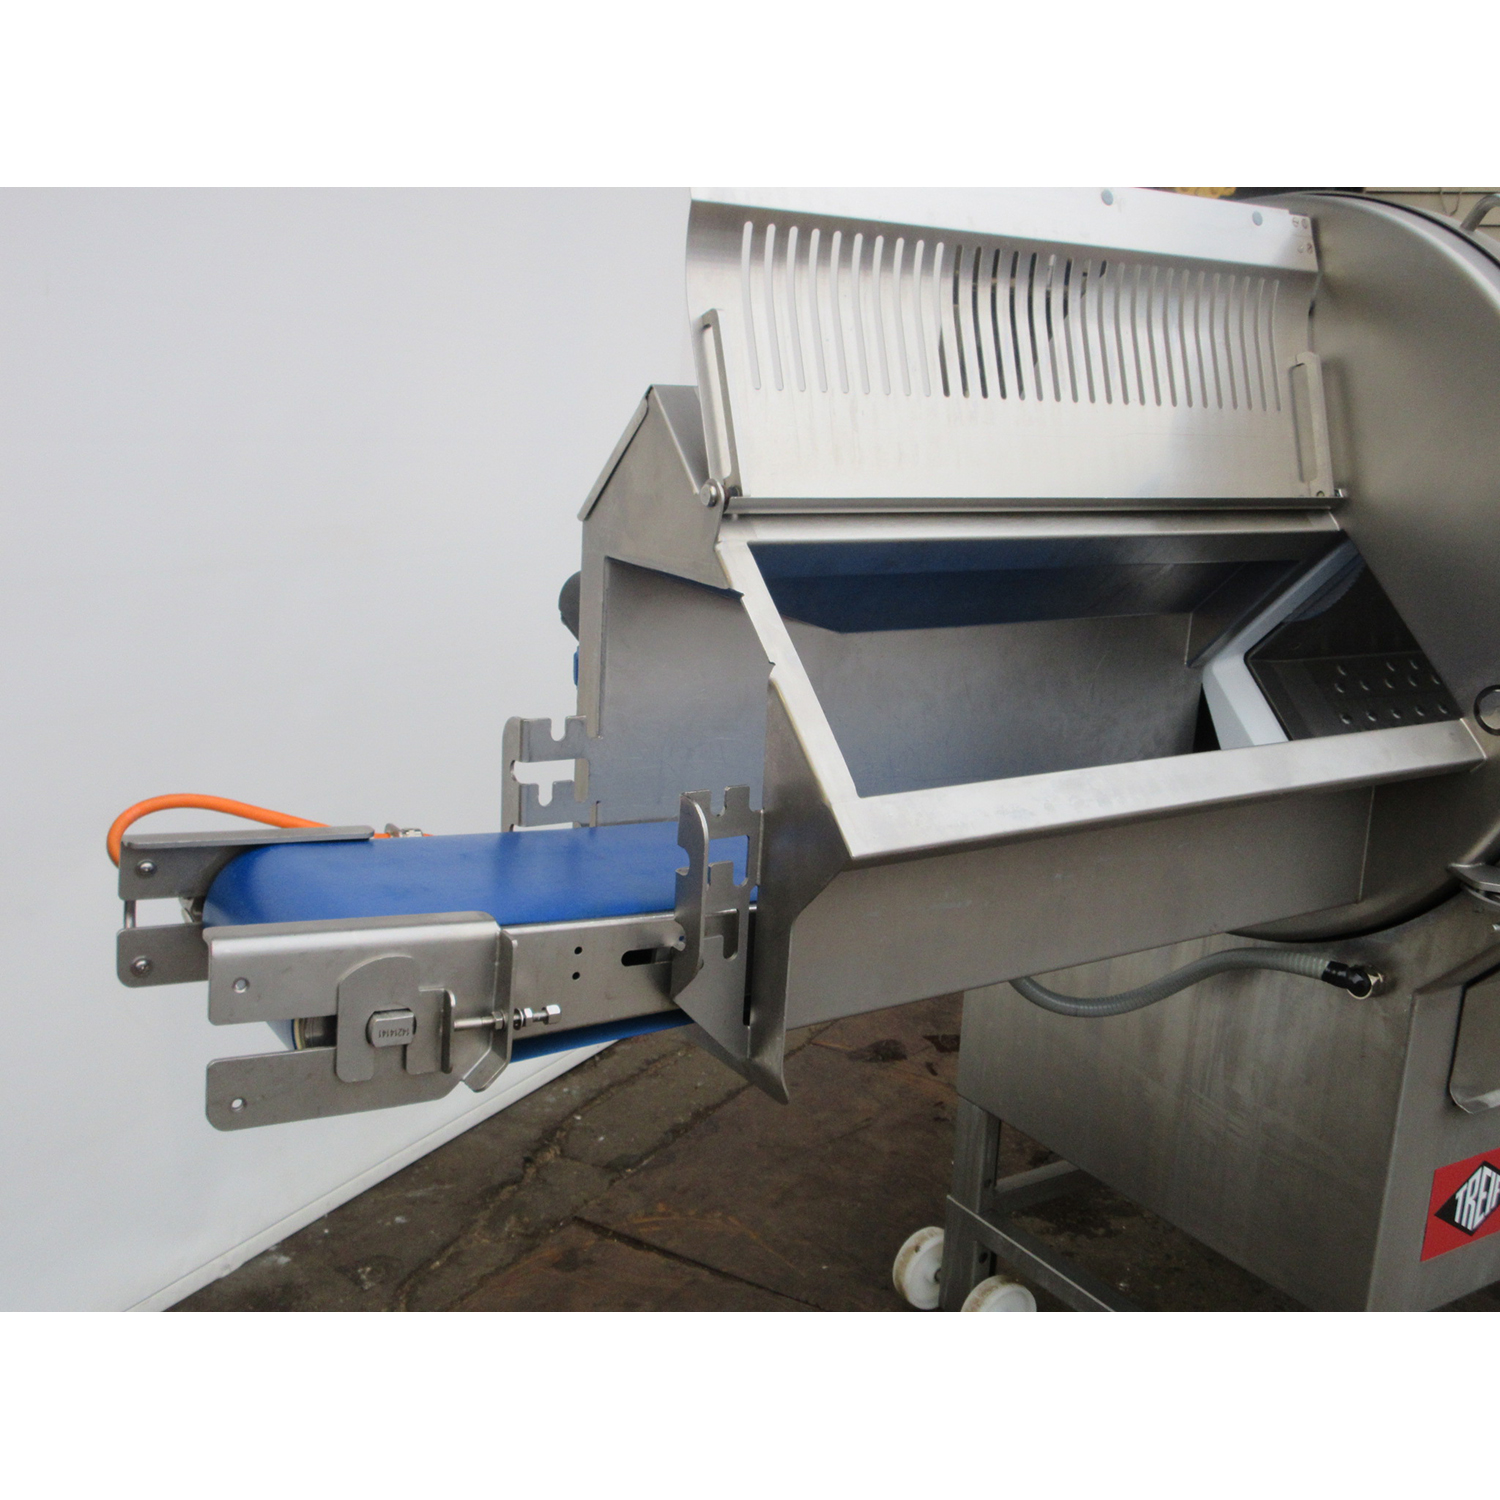 Treif PUMACE700EB Meat Portion Slicer, Used Excellent Condition image 4